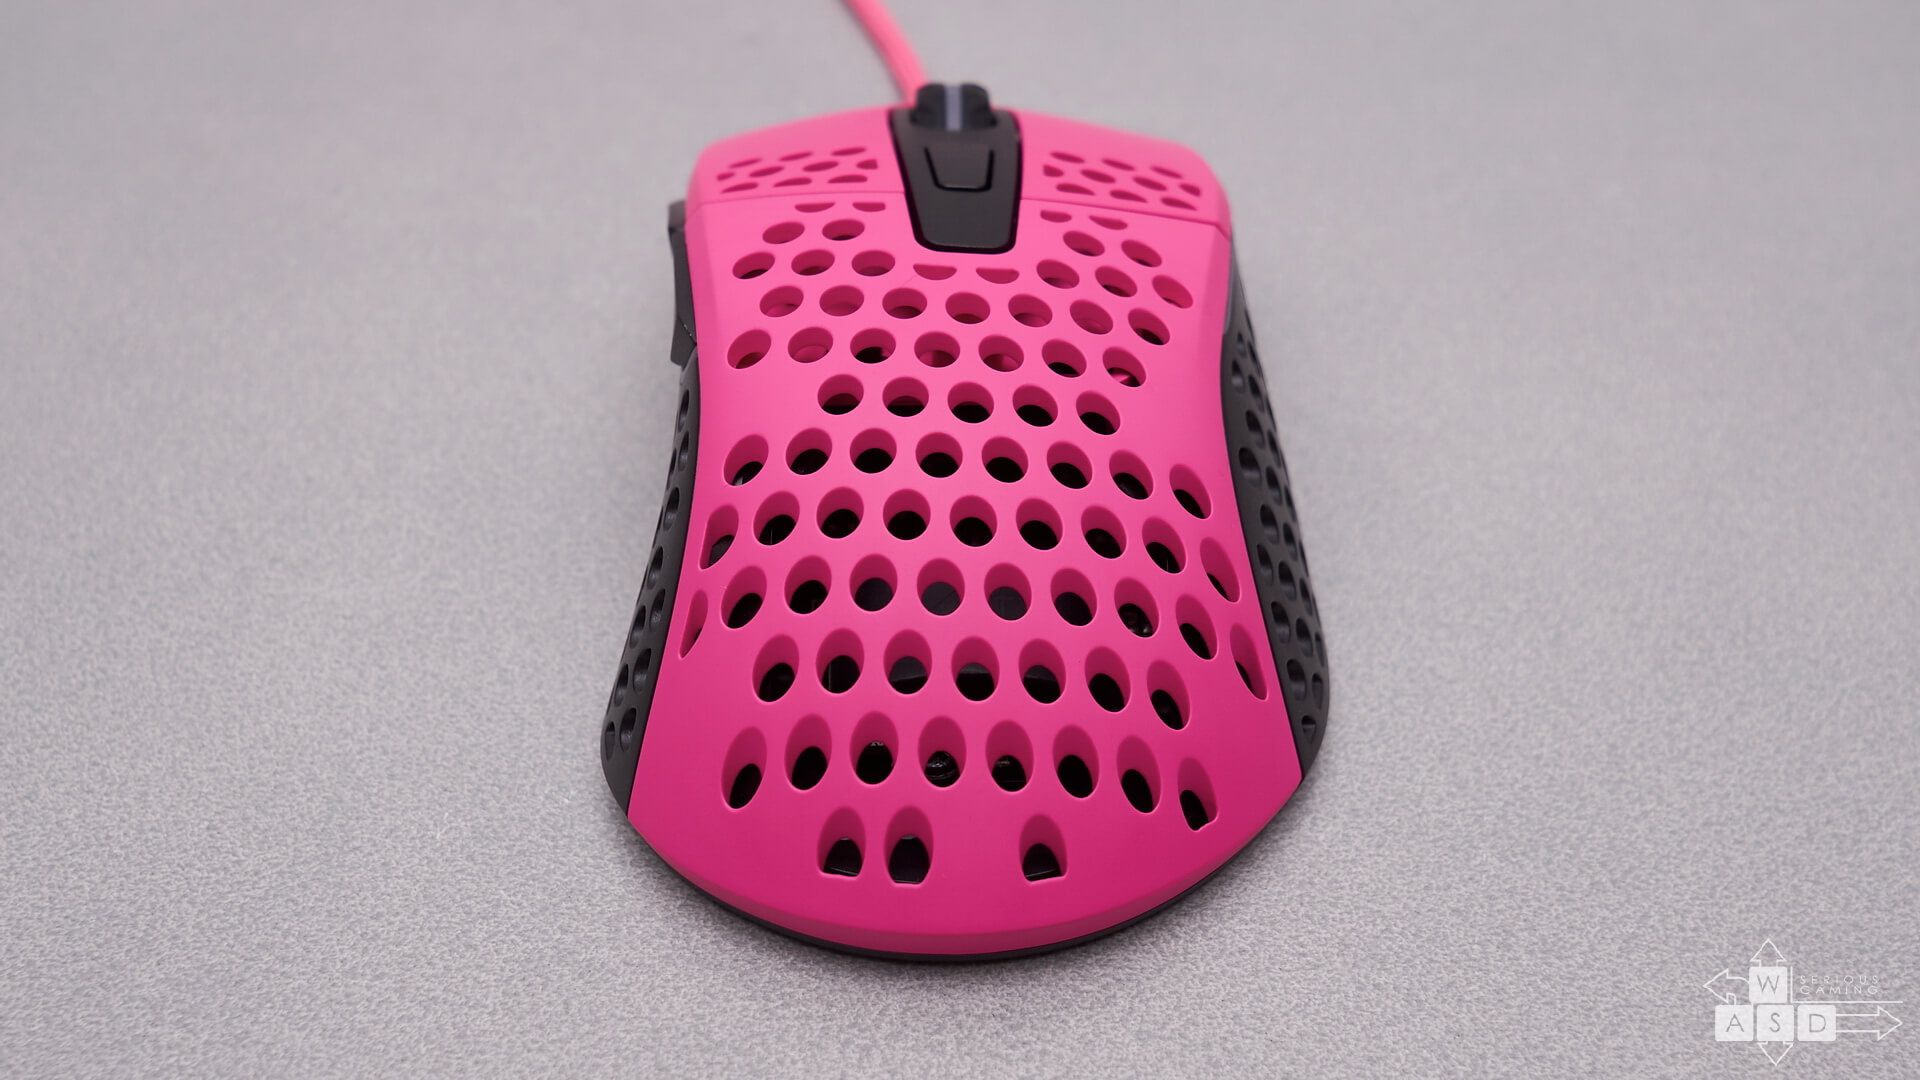 Xtrfy M4 Pink review | WASD